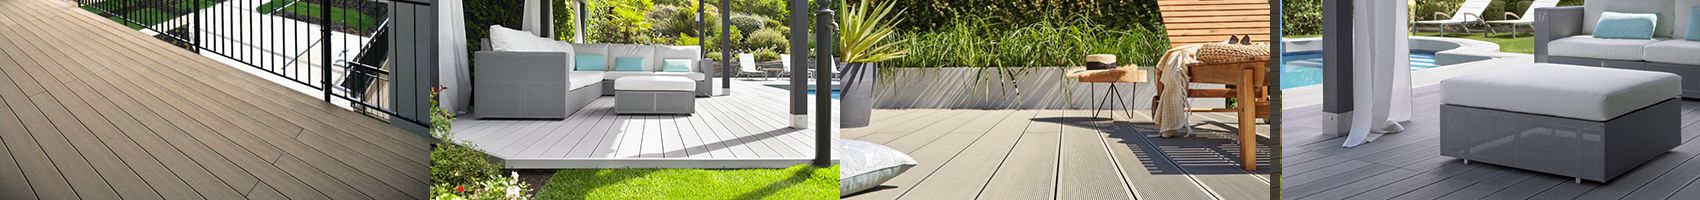 140mm Bark Double Faced Twinson Decking 6m 